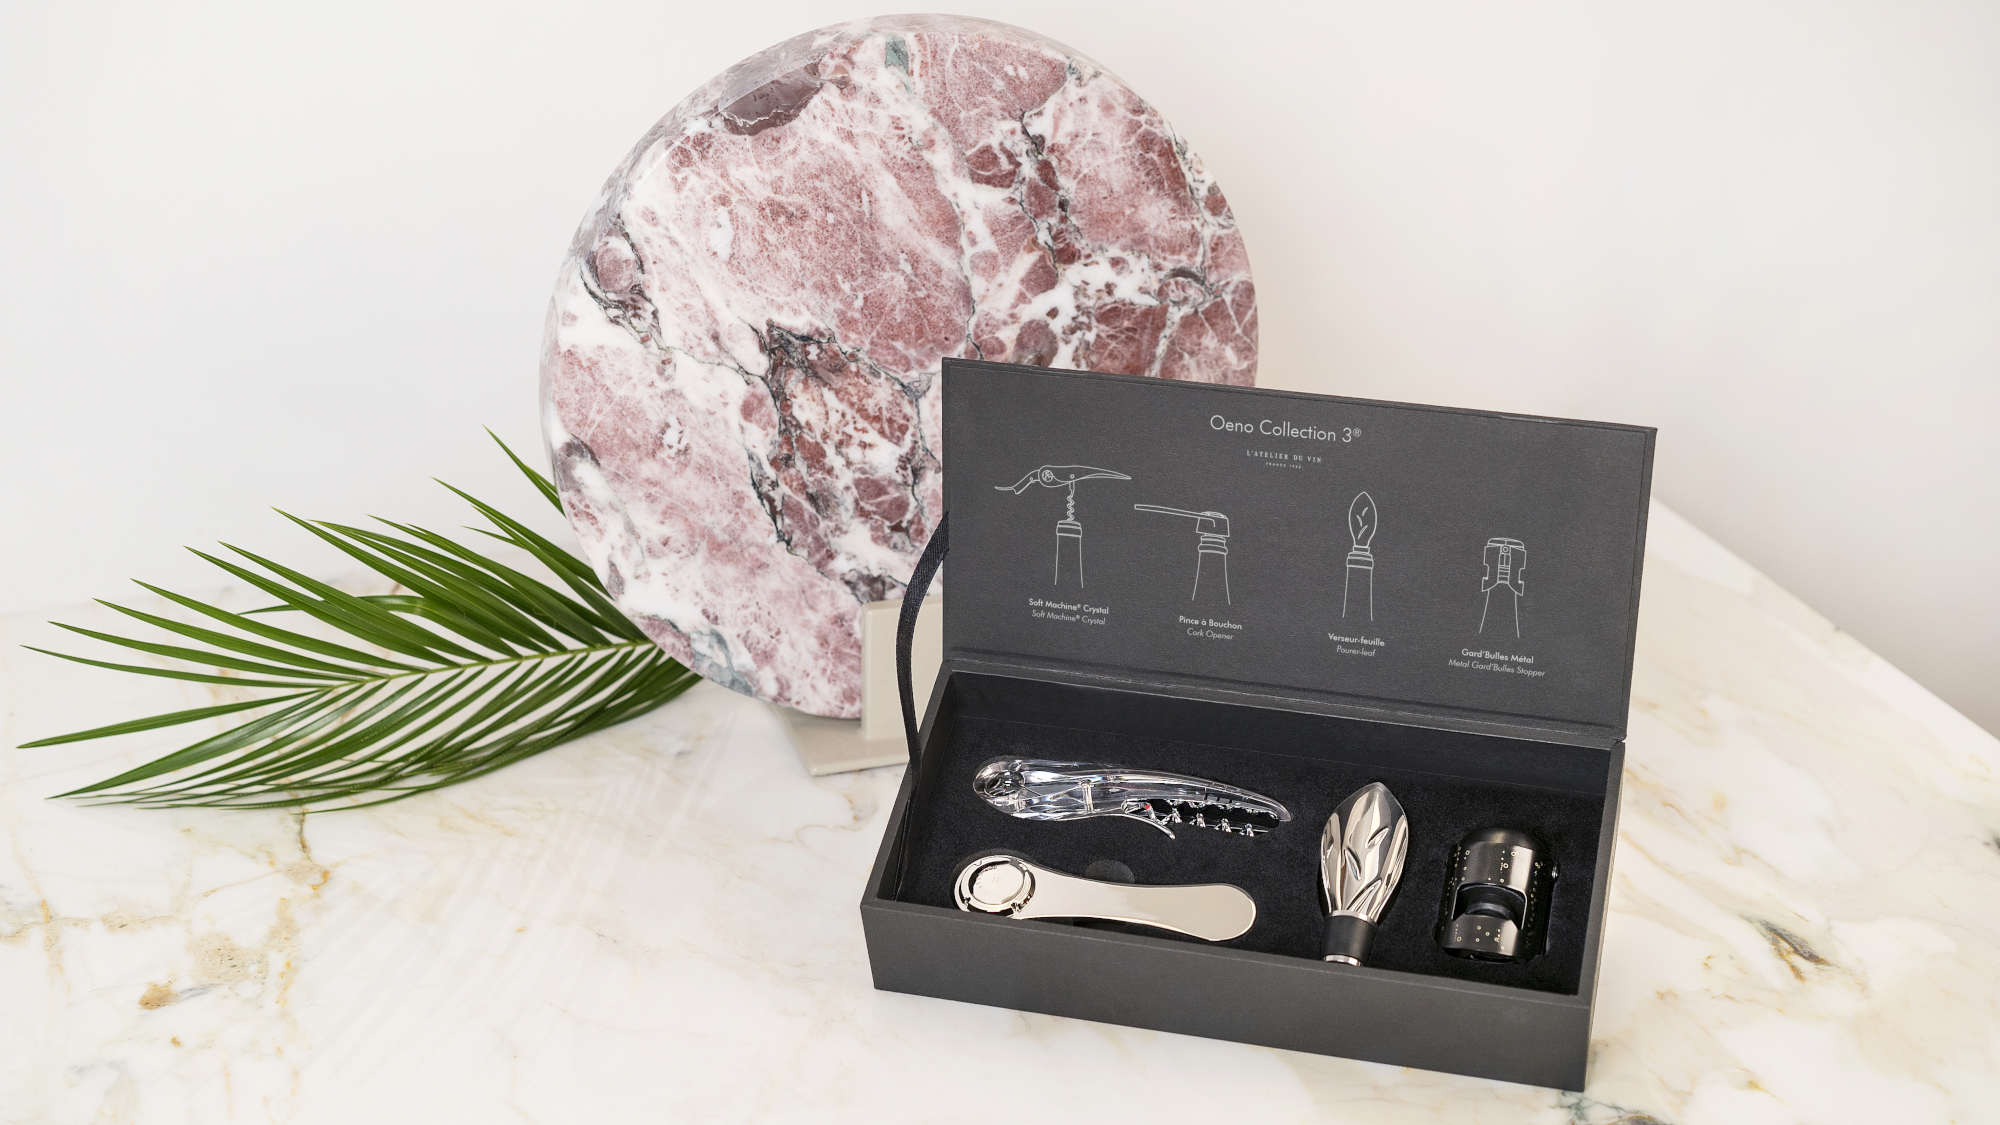 Coffret sommelier oeno collection 3